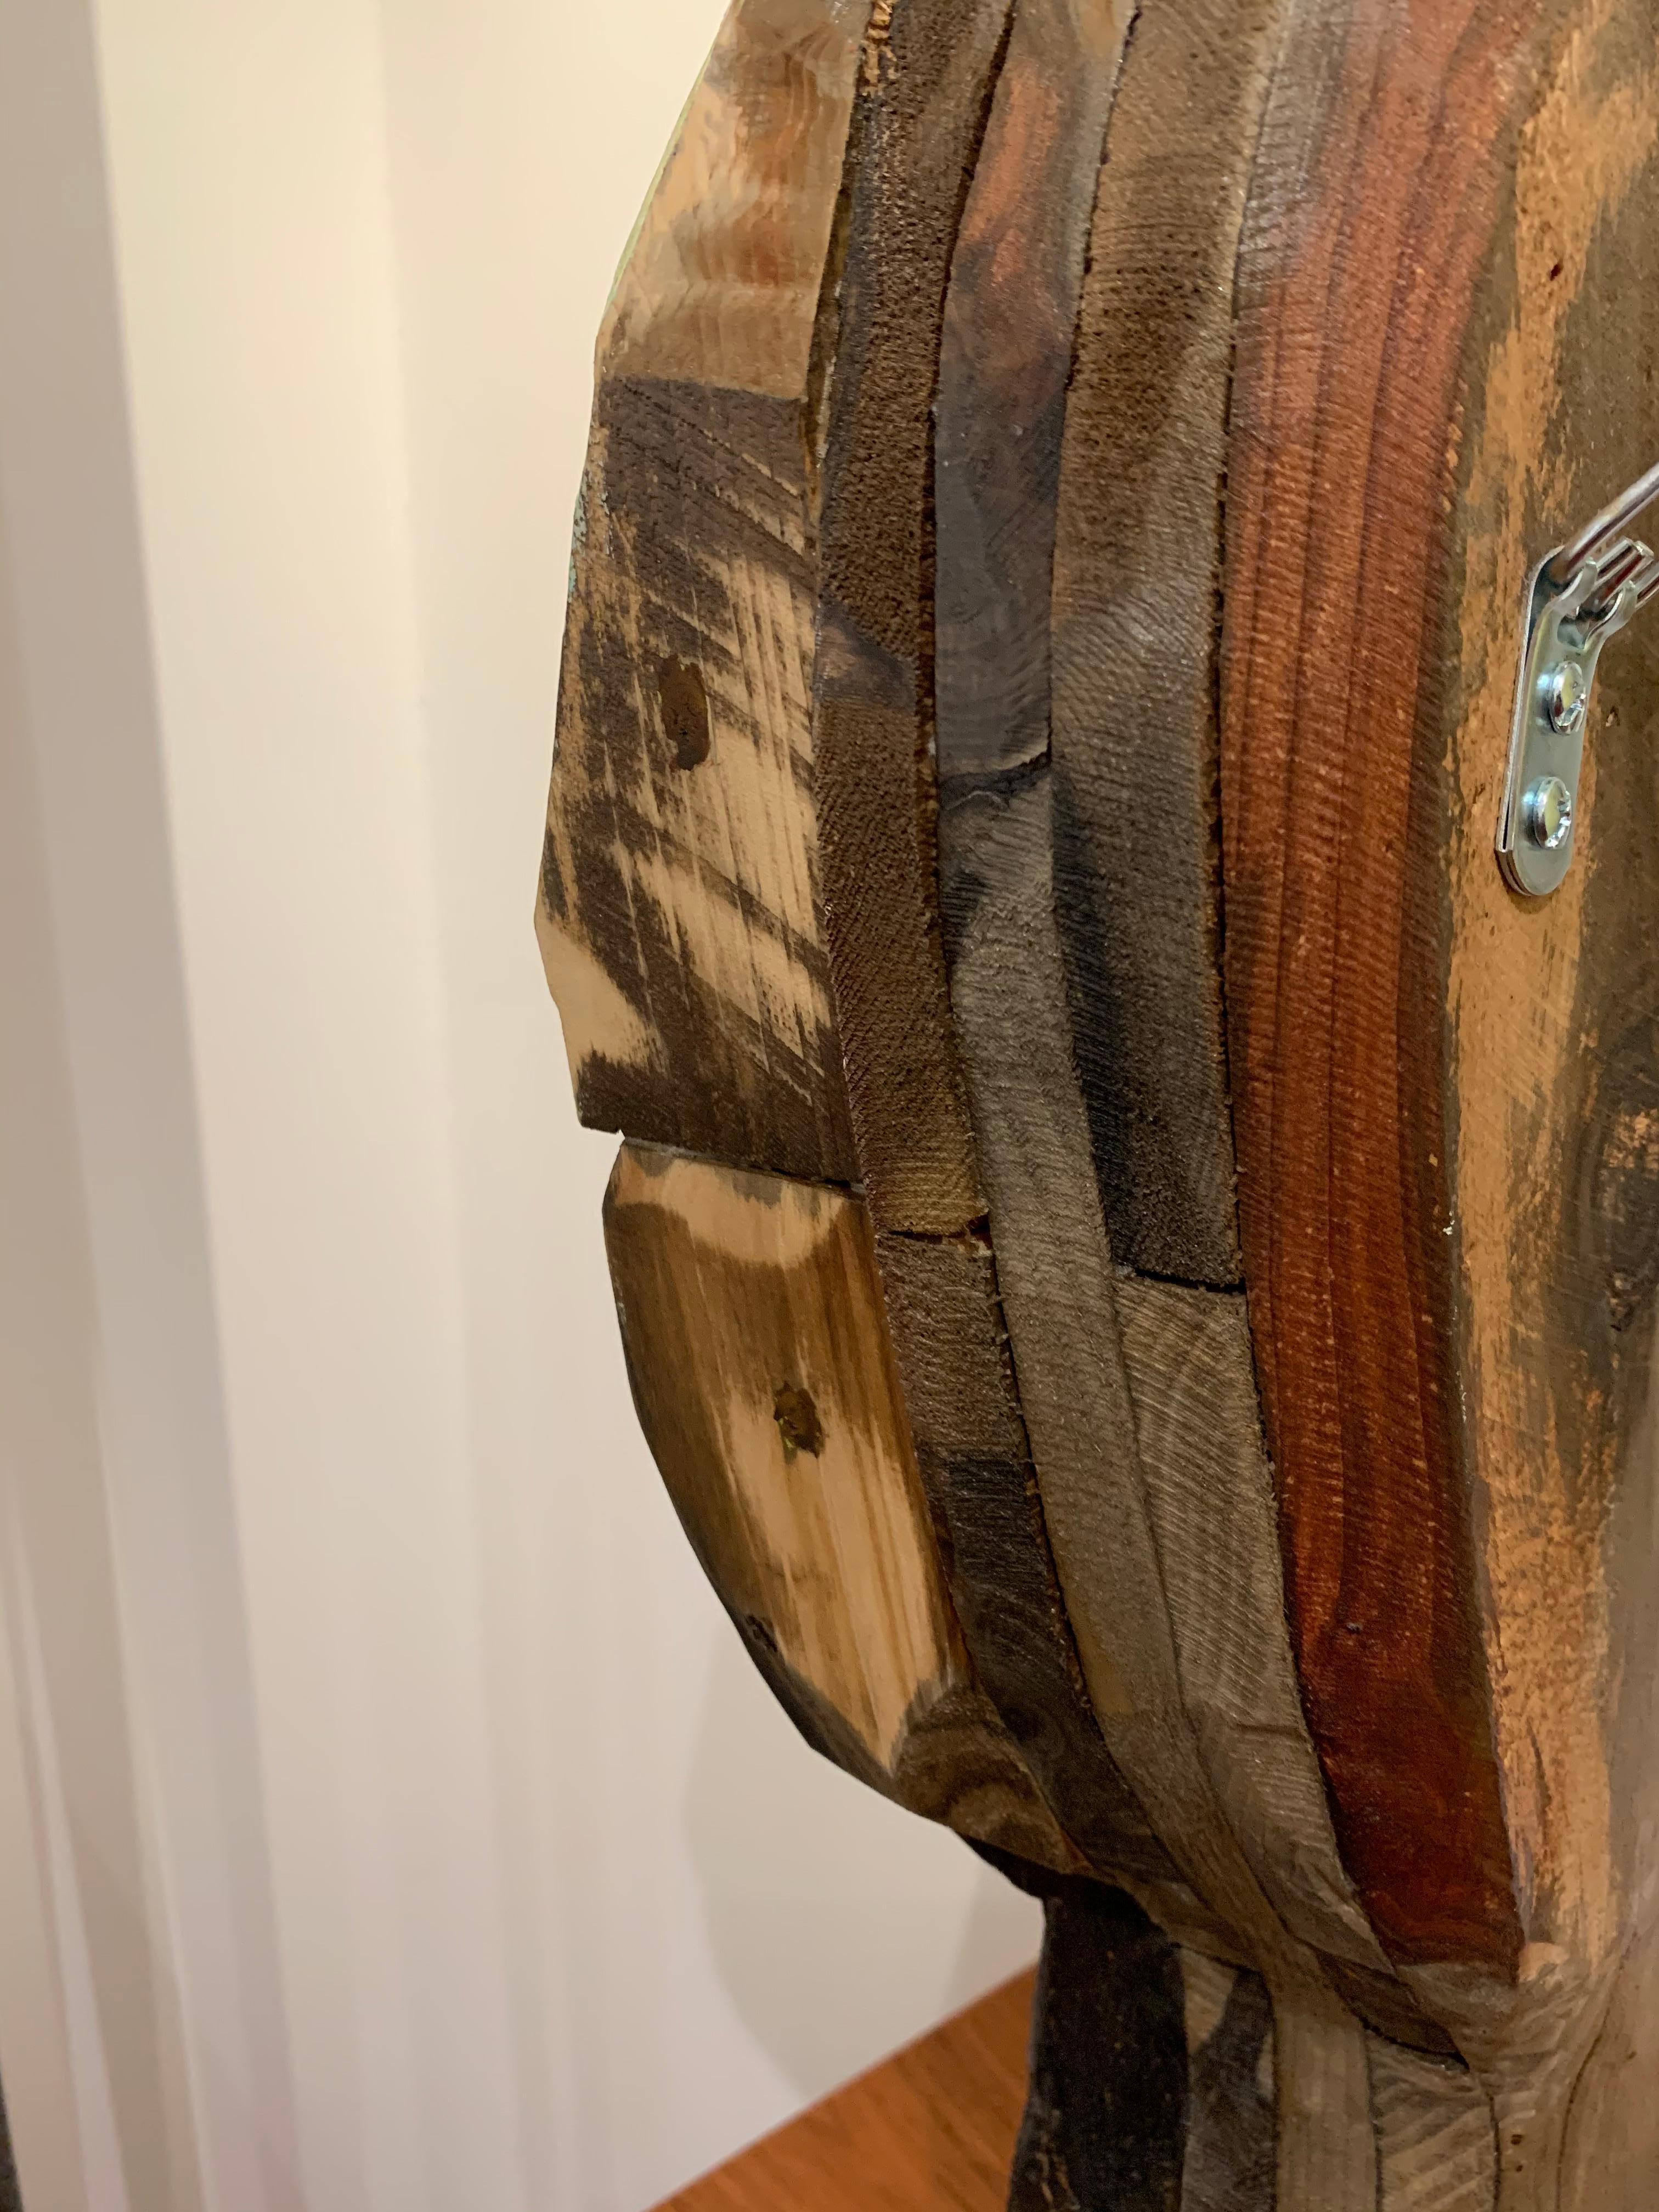 Leaning, a wood sculpture by artist Chris Reilly. This piece may be displayed atop a surface or hanging on the wall. 

Chris Reilly has made a career of painting beautiful nature scenes in encaustic. He was born in New York and has called San Diego